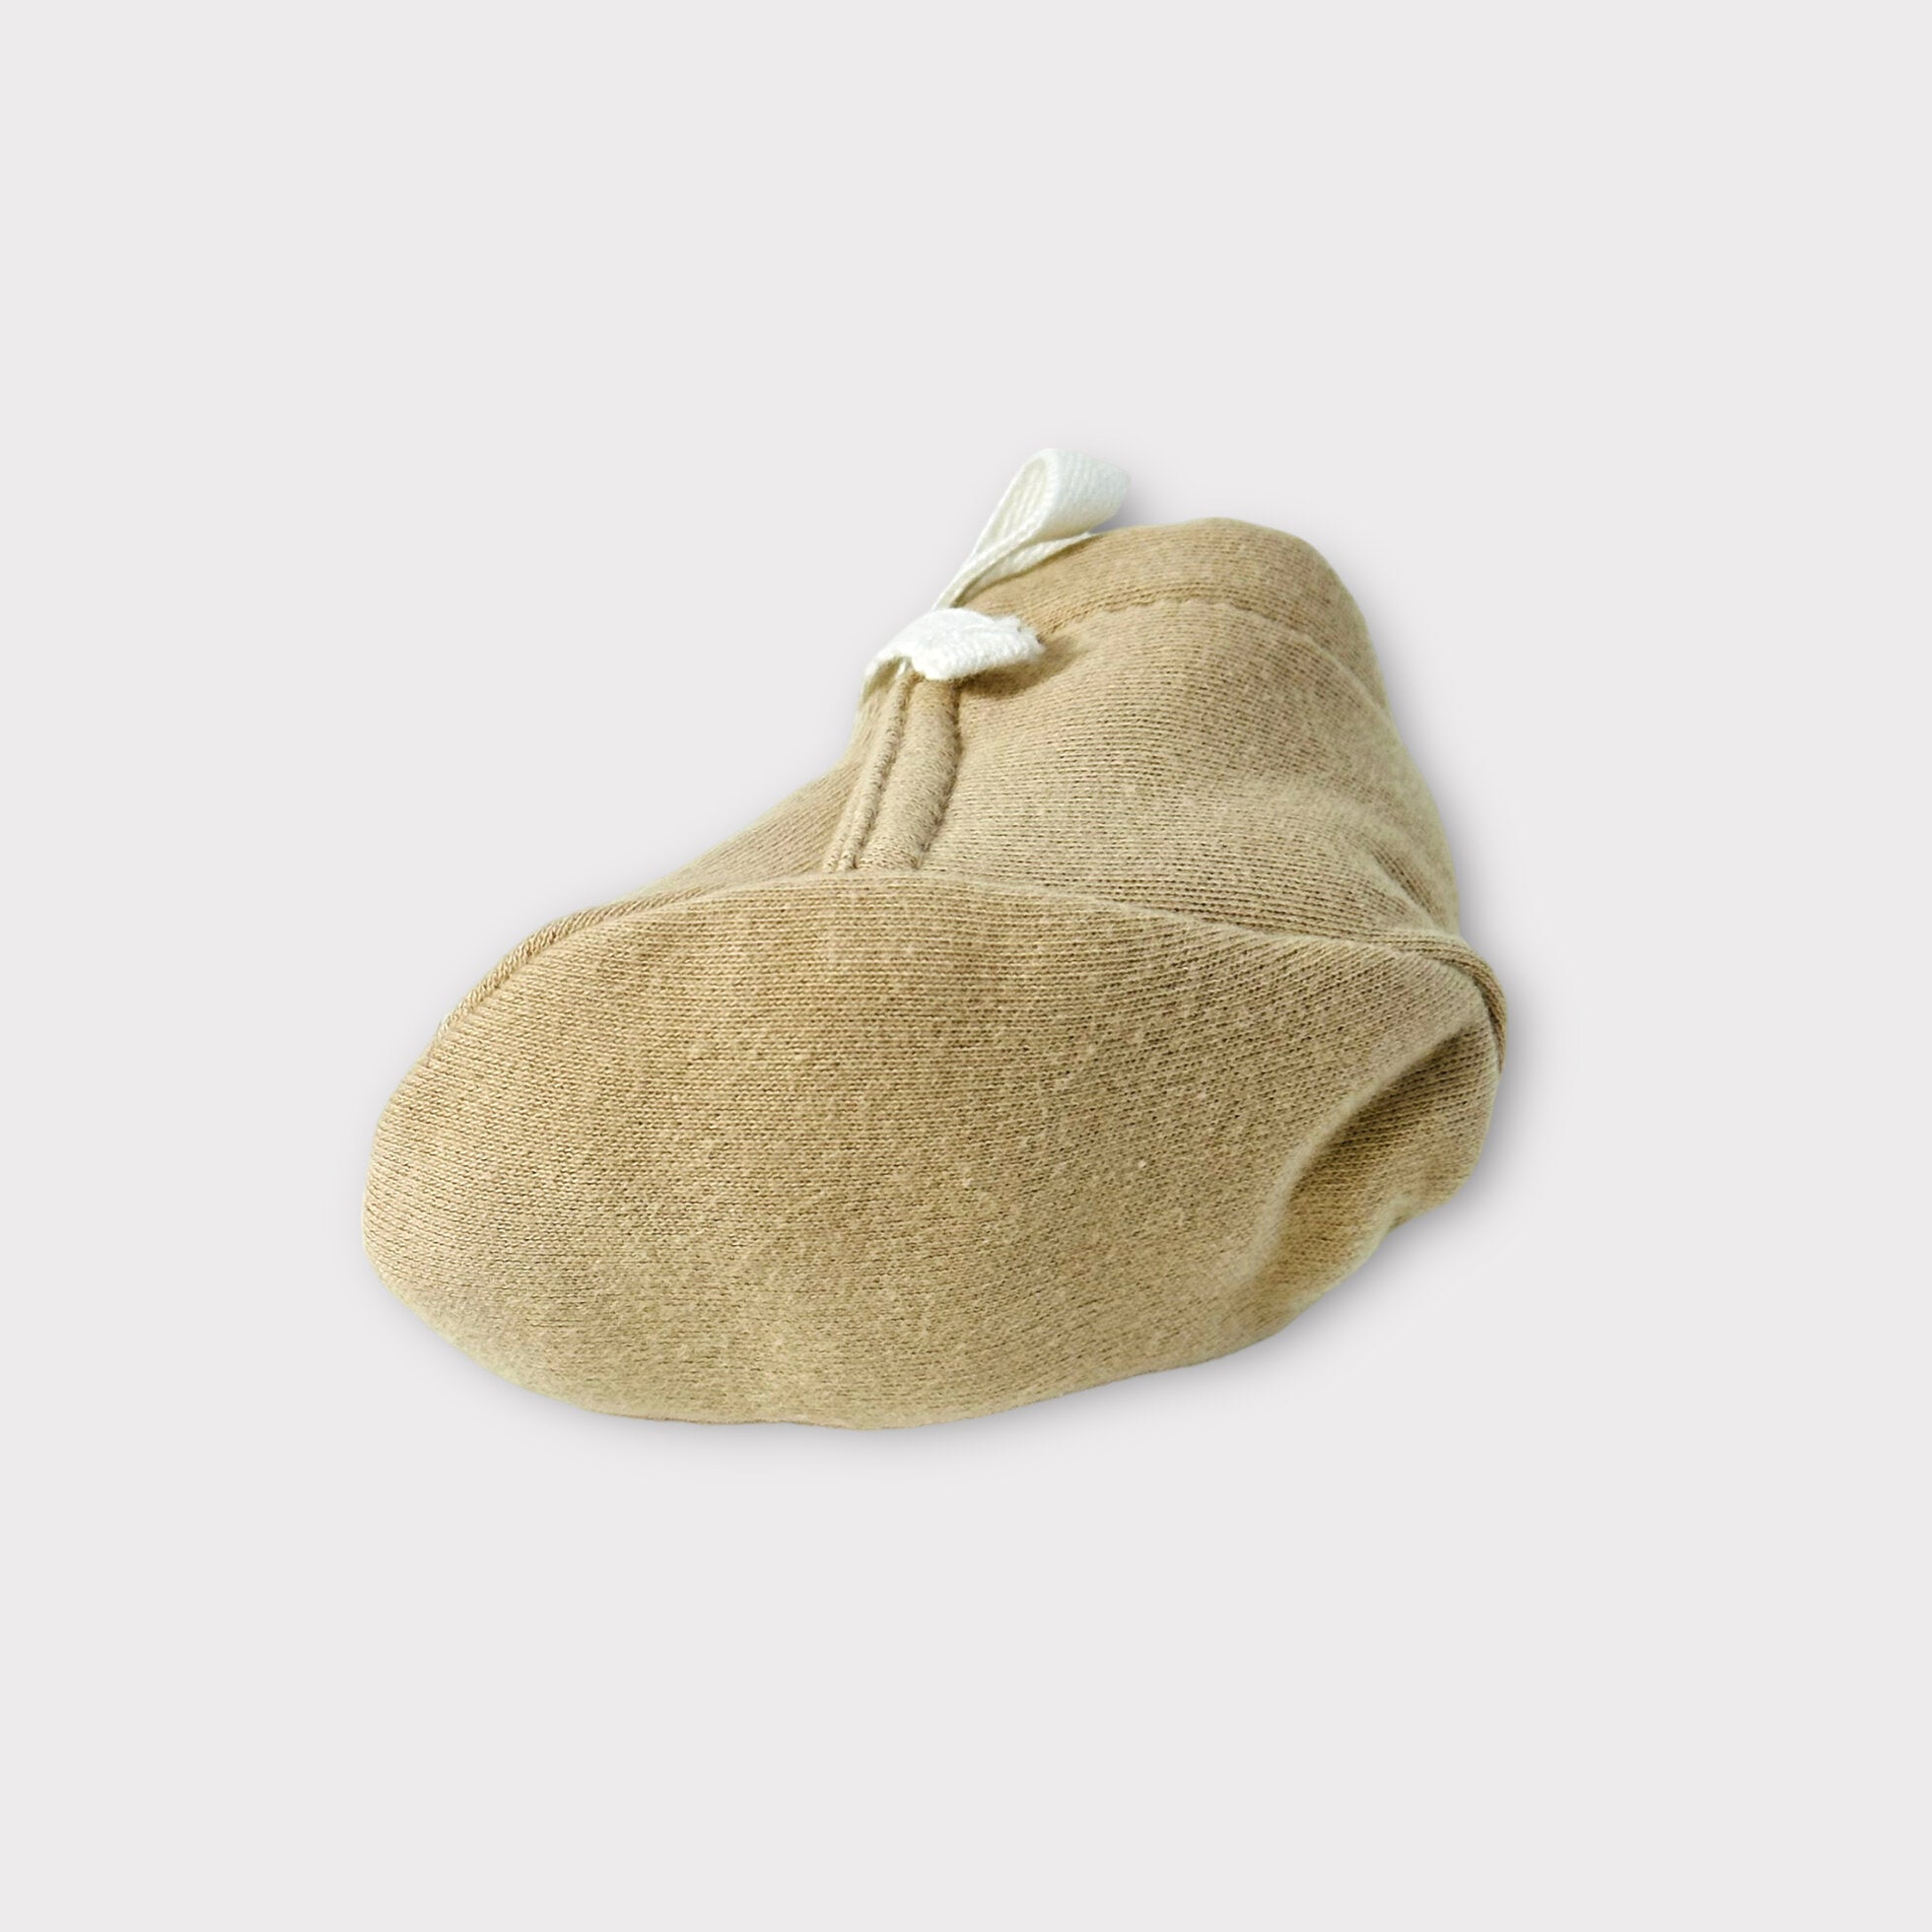 Organic Cotton Solid Baby Booties - 3 Colors